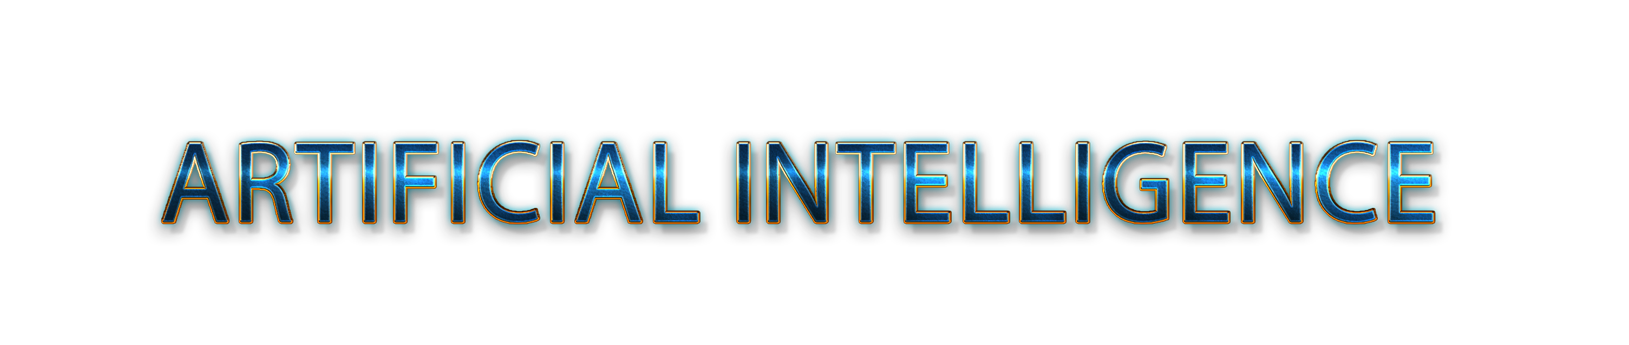 Artificial Intelligence png, word Artificial Intelligence png, Artificial Intelligence word png, Artificial Intelligence text png, Artificial Intelligence typography PNG images